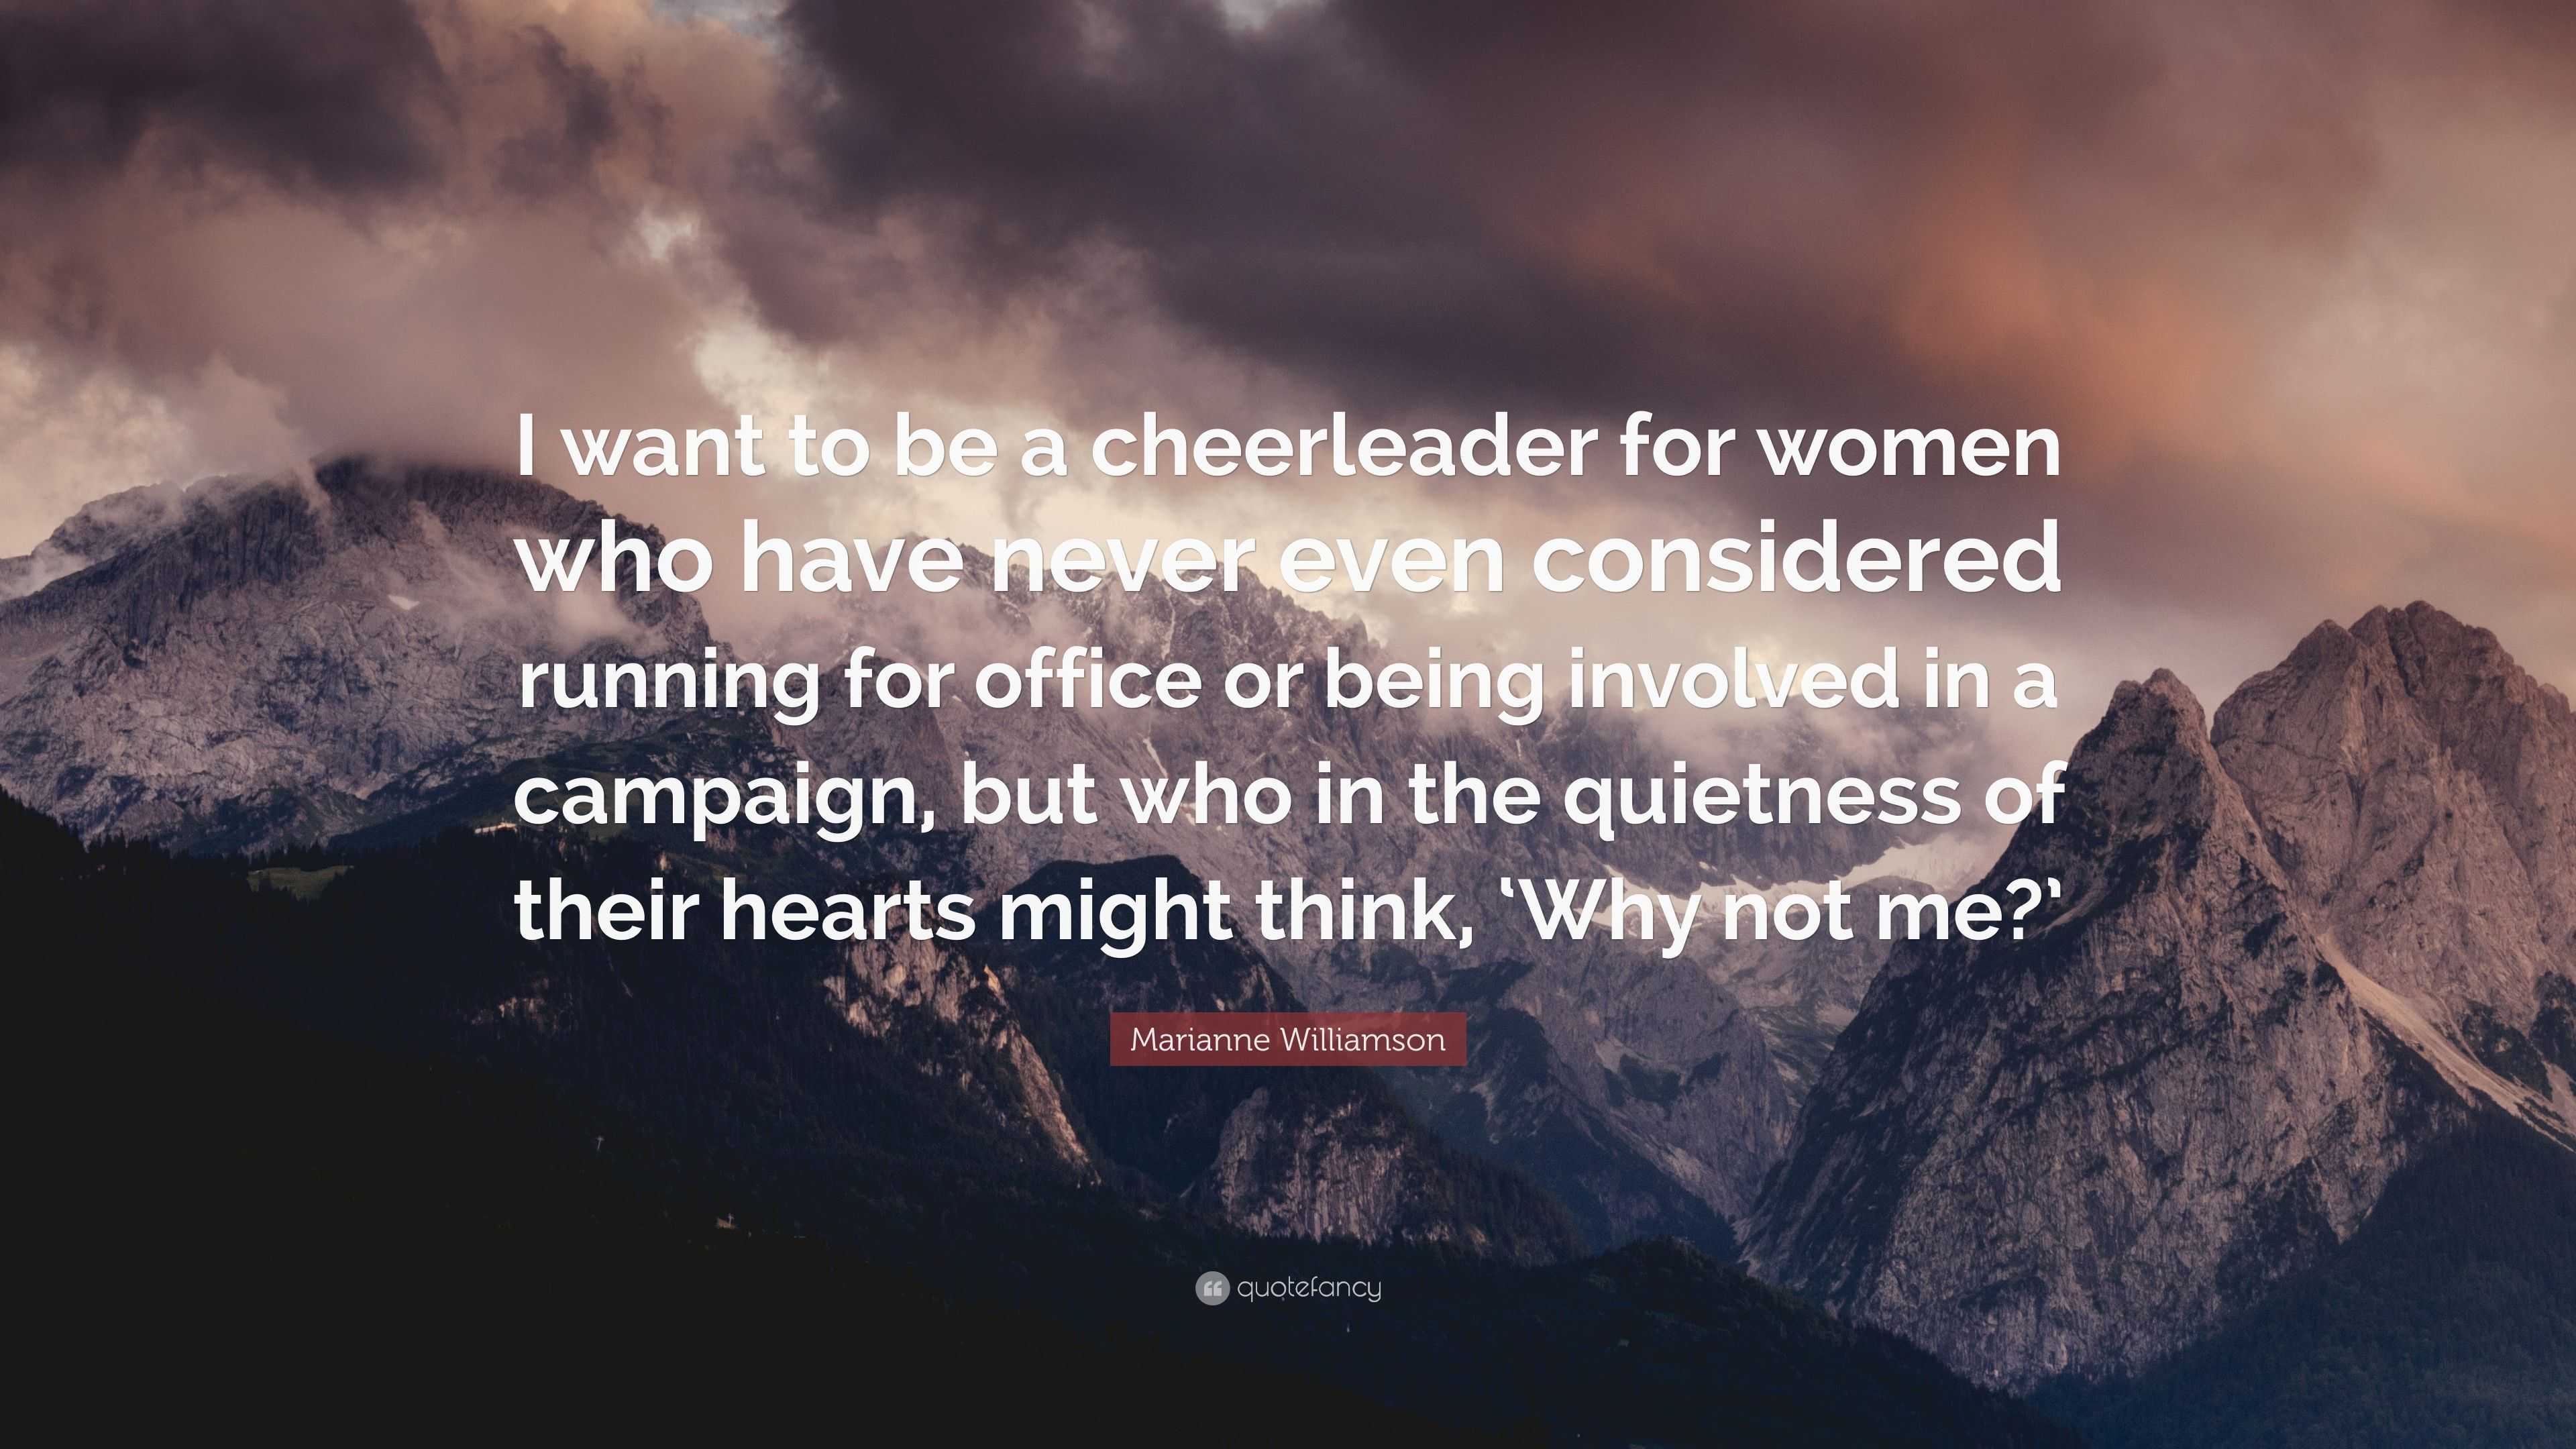 Marianne Williamson Quote: "I want to be a cheerleader for ...